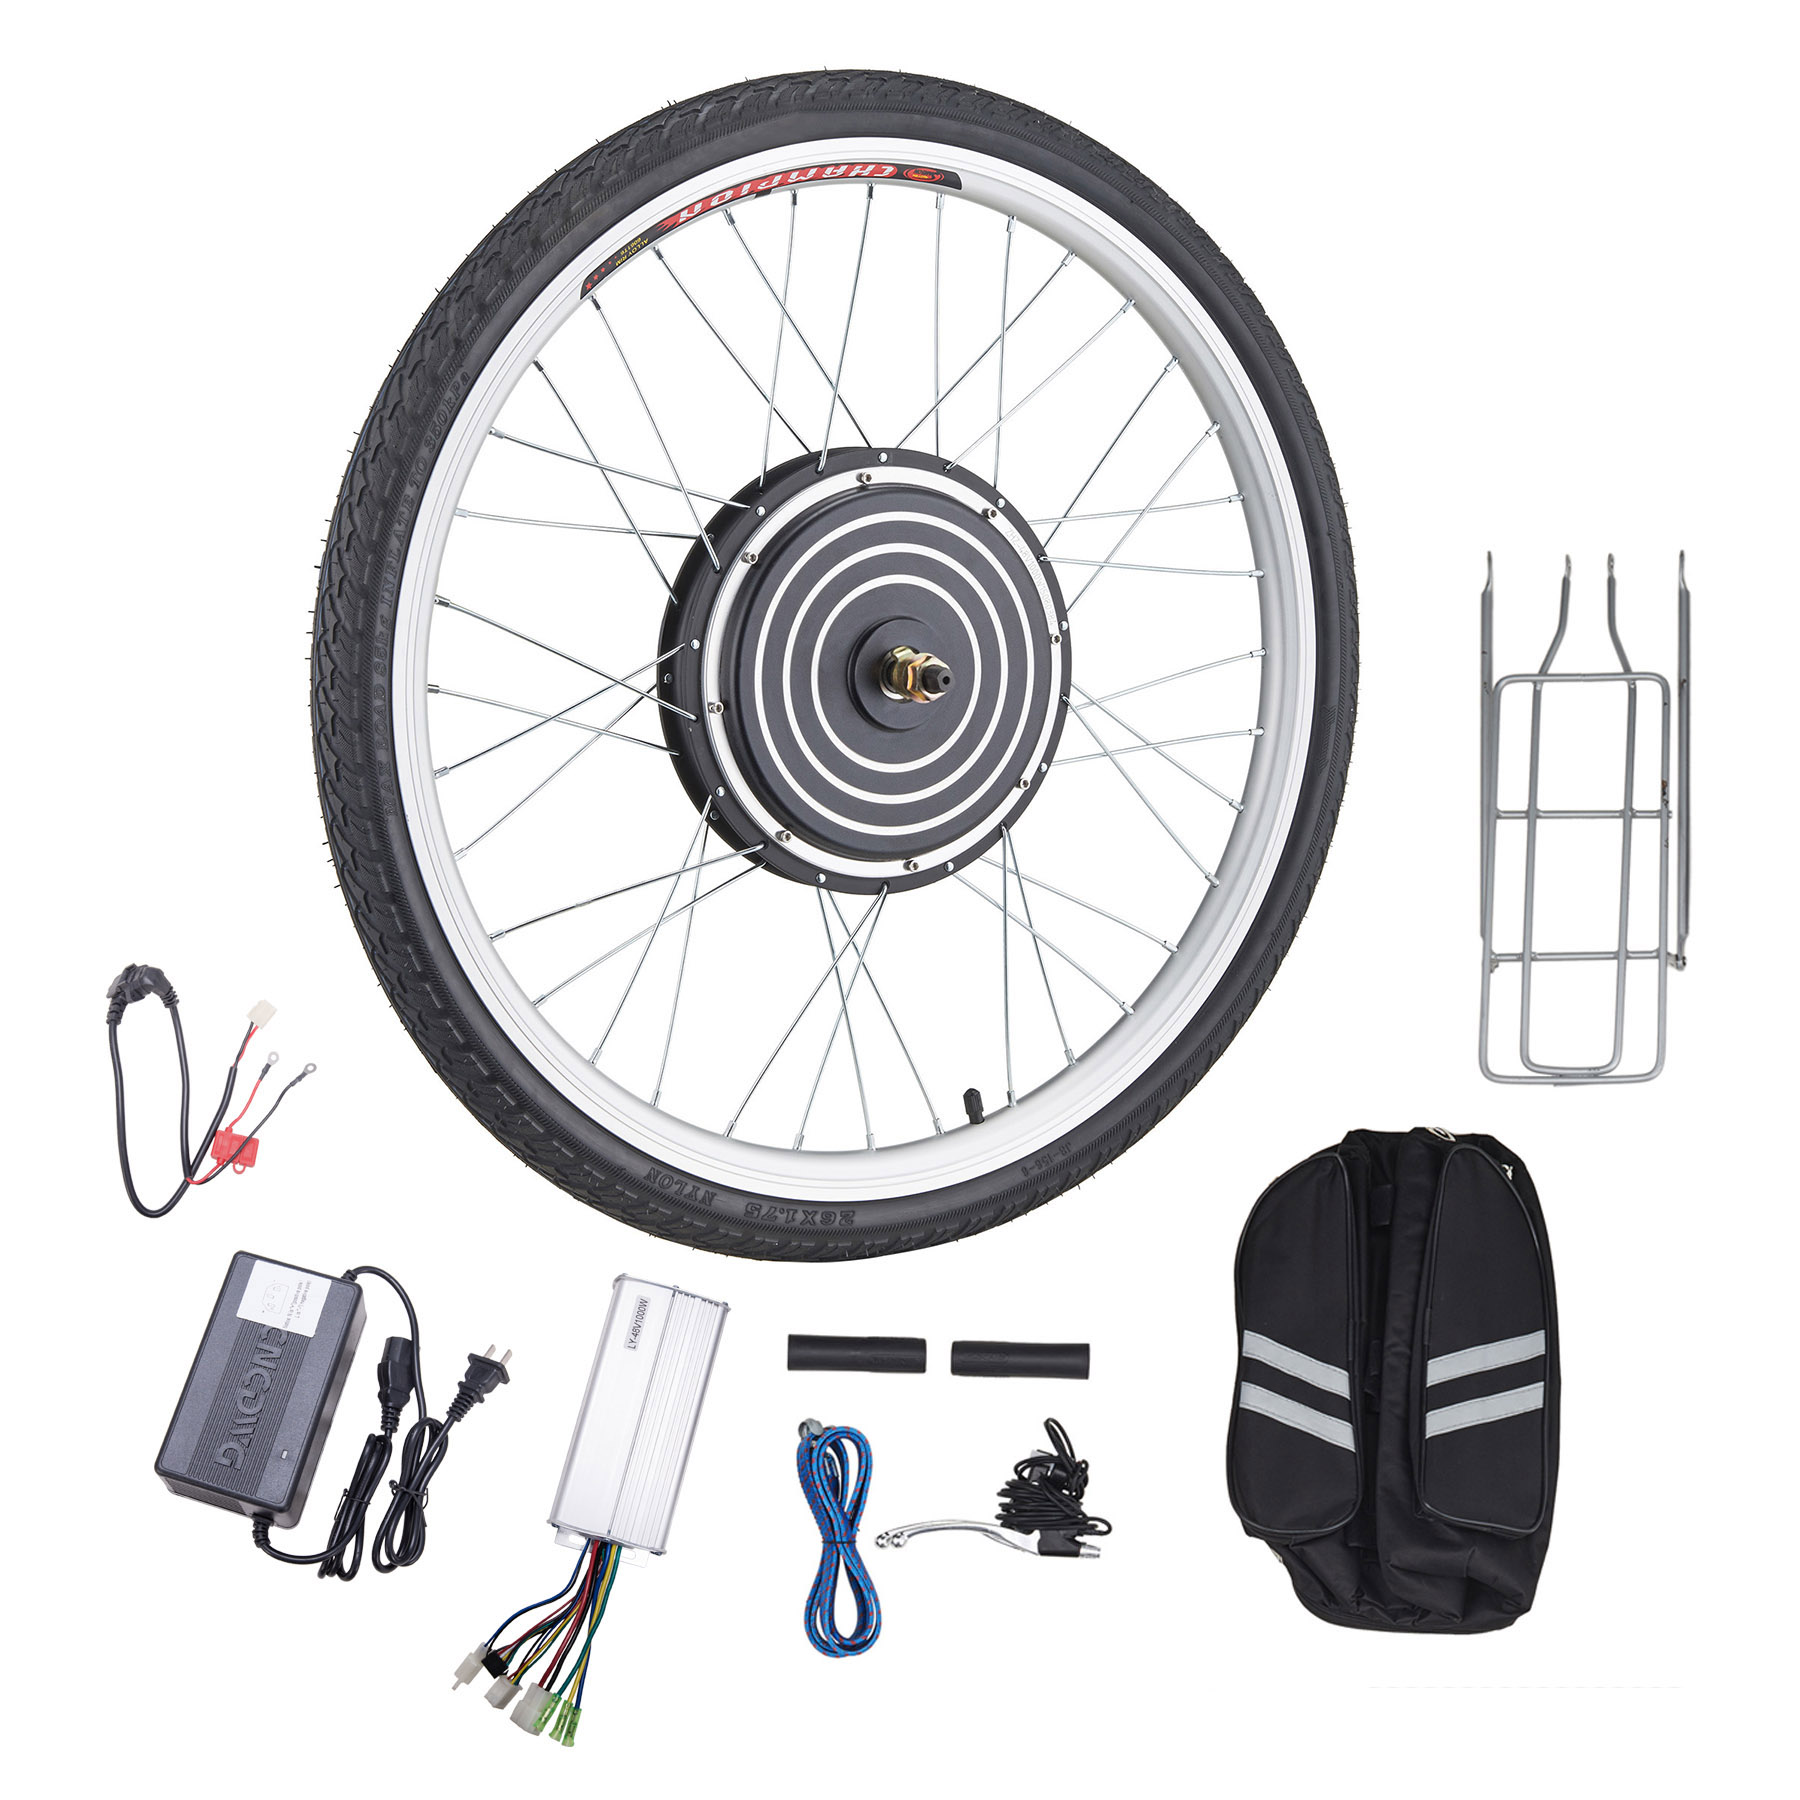 26"x1.8" Front or Rear Wheel Ebike Hub Motor Conversion Kit with Dual Mode Controller, 36V 500W or 48V 1000W - image 1 of 7